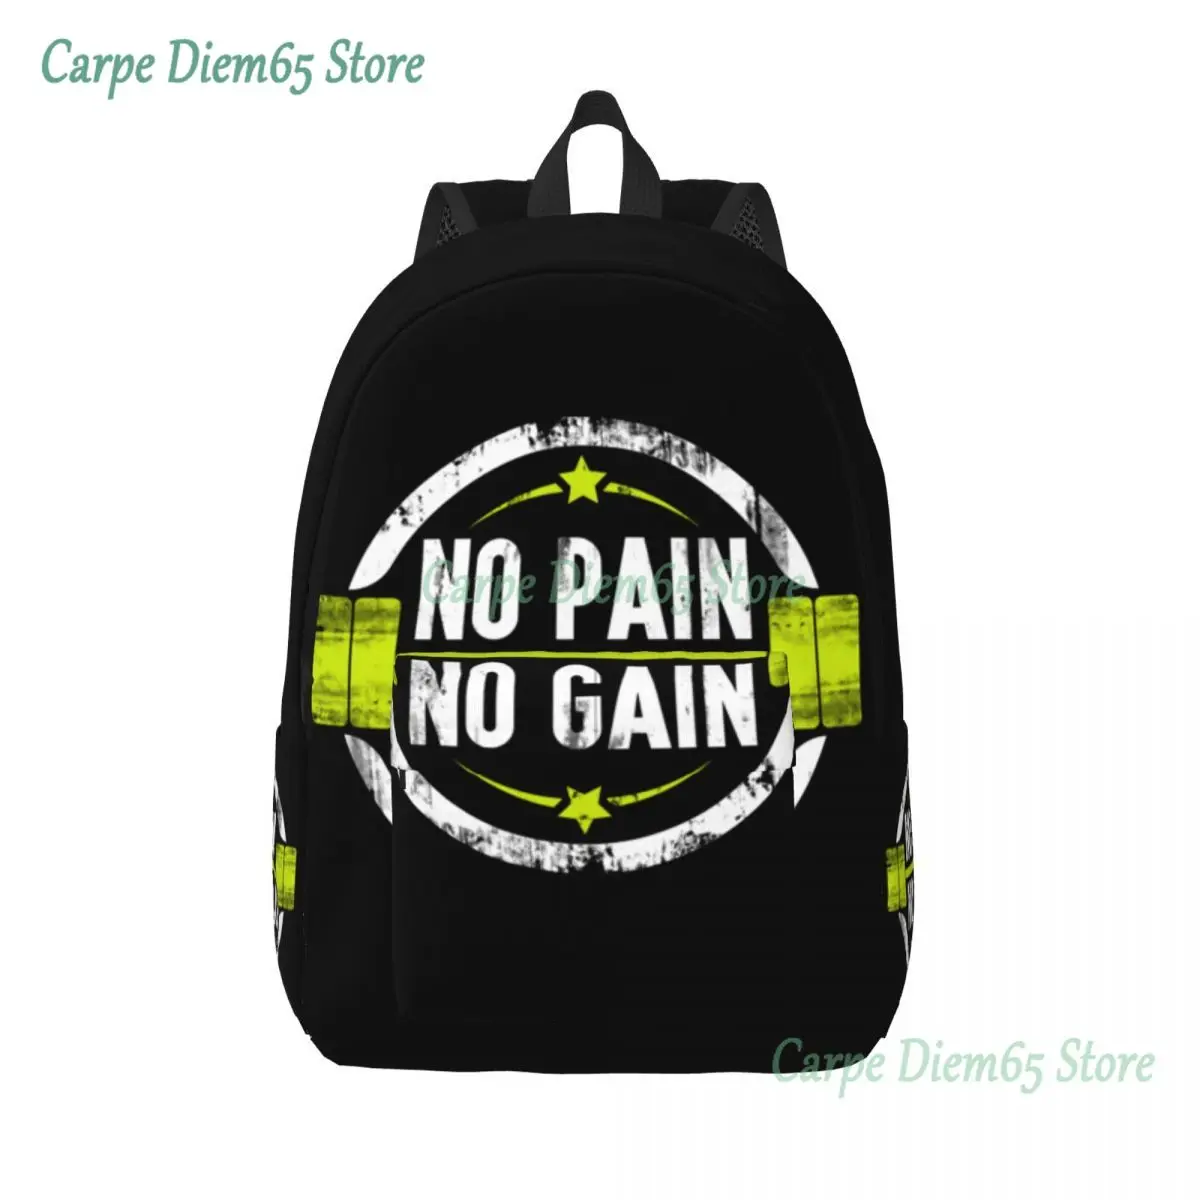 

No Pain No Gain Travel Canvas Backpack Men Women School Laptop Bookbag Gym Quote Motivation Fitness College Student Daypack Bags